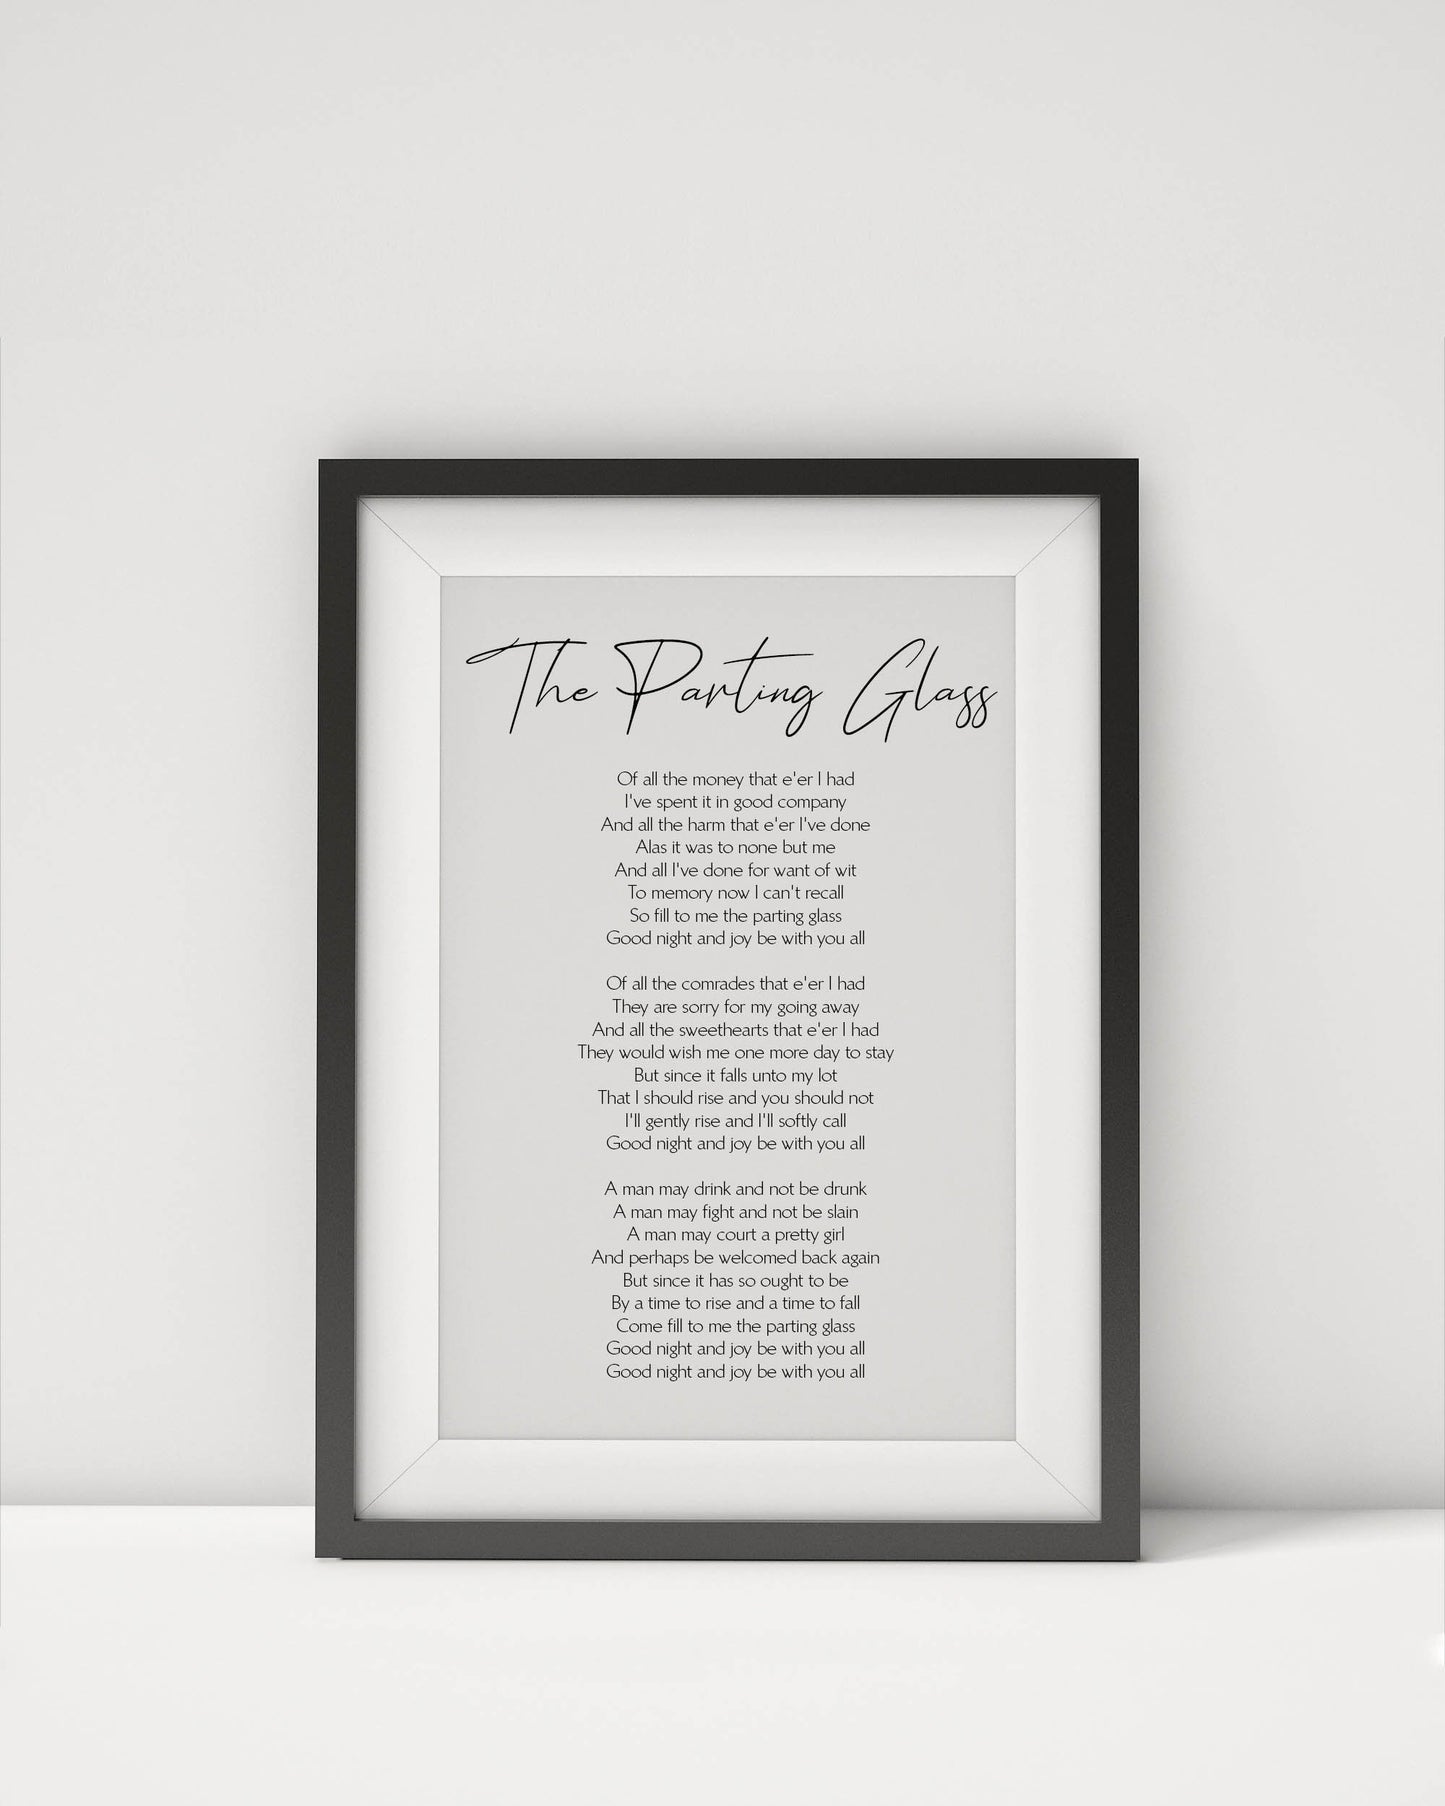 The parting glass Print Framed - Irish Song Print - Traditional Irish speech a life well lived Poem - The parting glass song lyrics